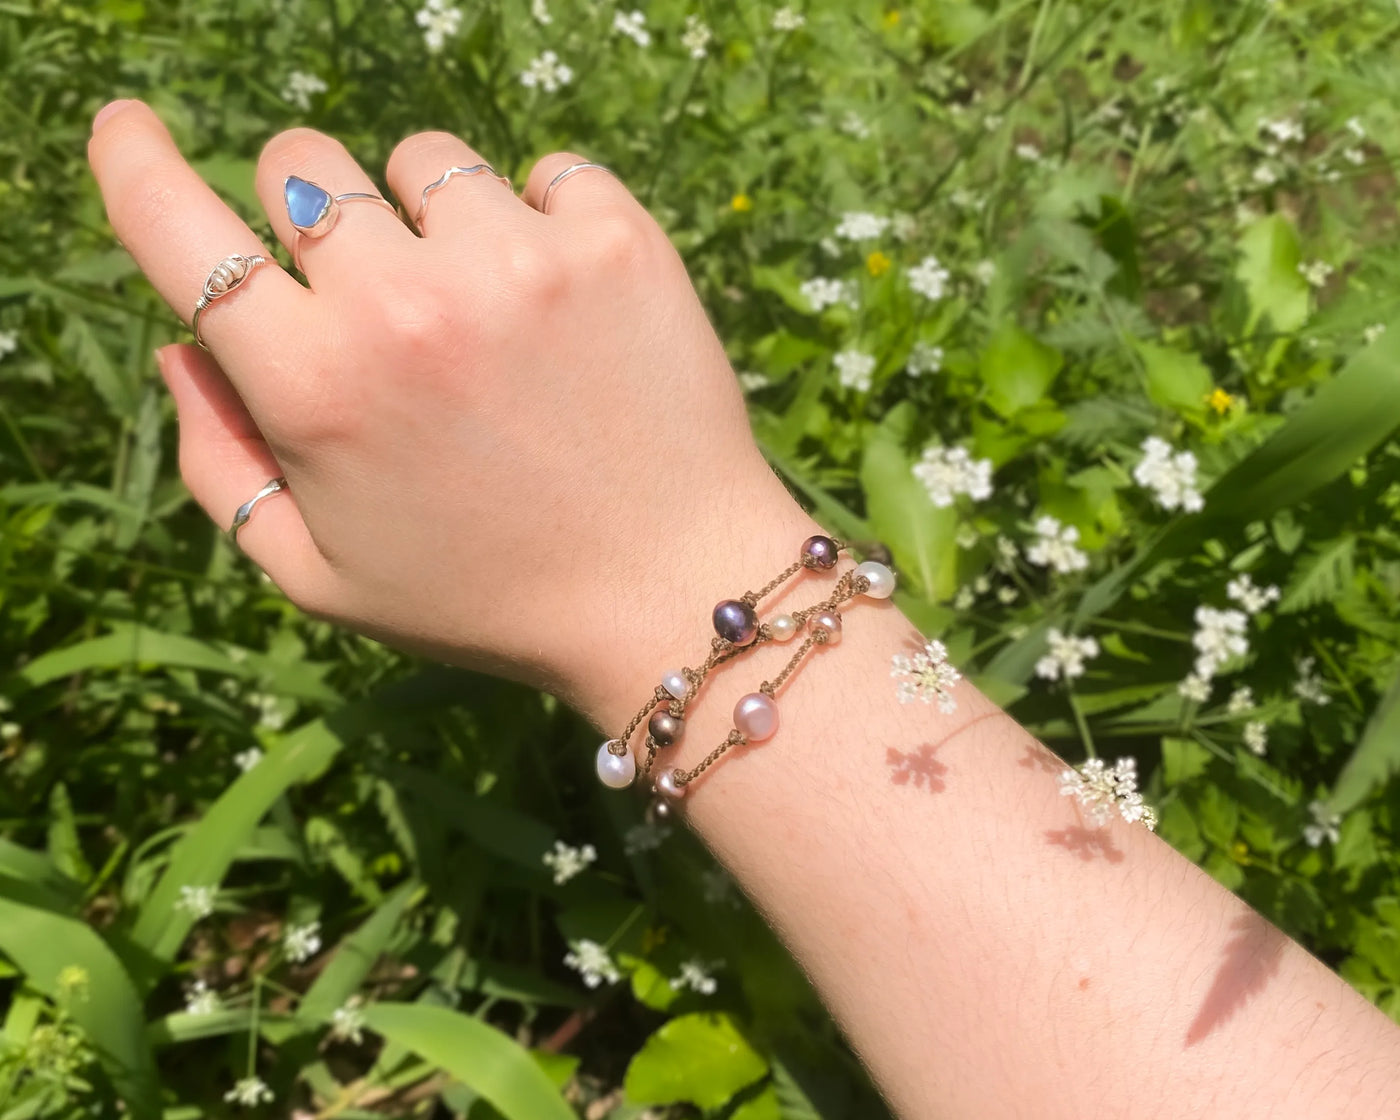 Tula Blue's Journey Bracelet in mixed pearls on model wrist in front of greenery